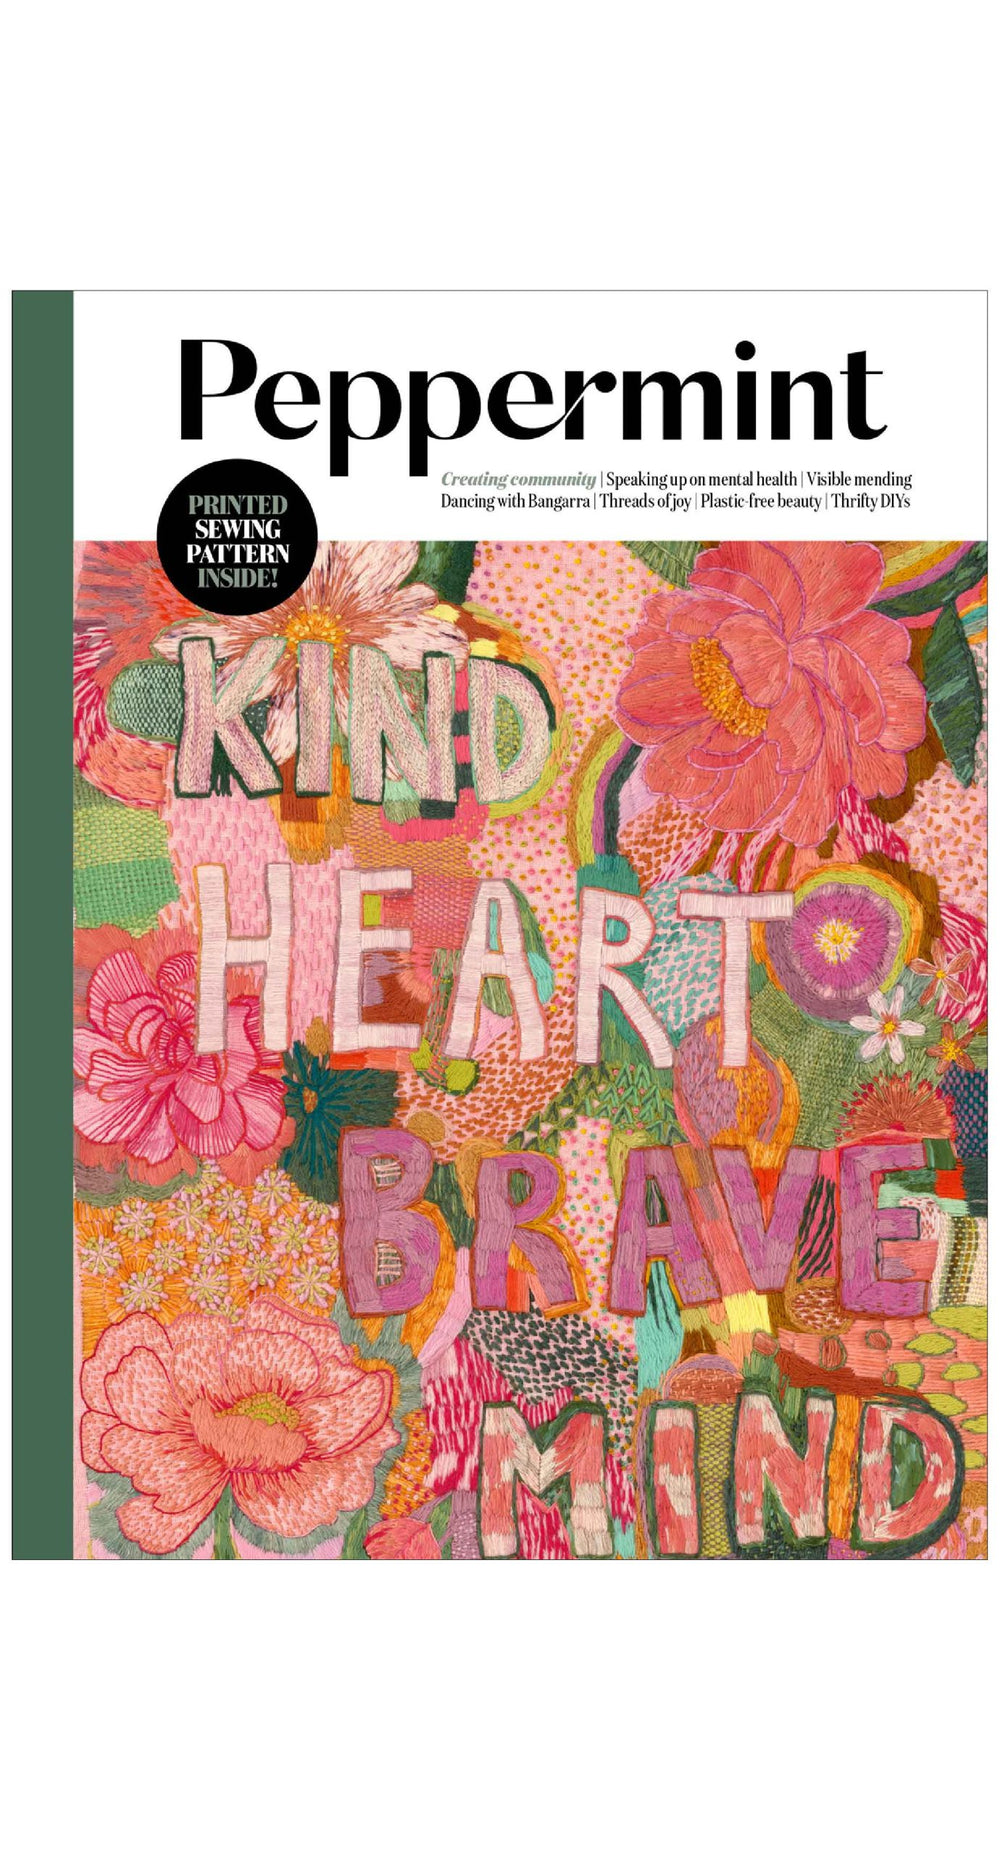 Issue 61 of Peppermint magazine on The Fold Line. An Australian magazine focused on style, sustainability, sewing and substance. Each issue includes a full-size printed sewing pattern.